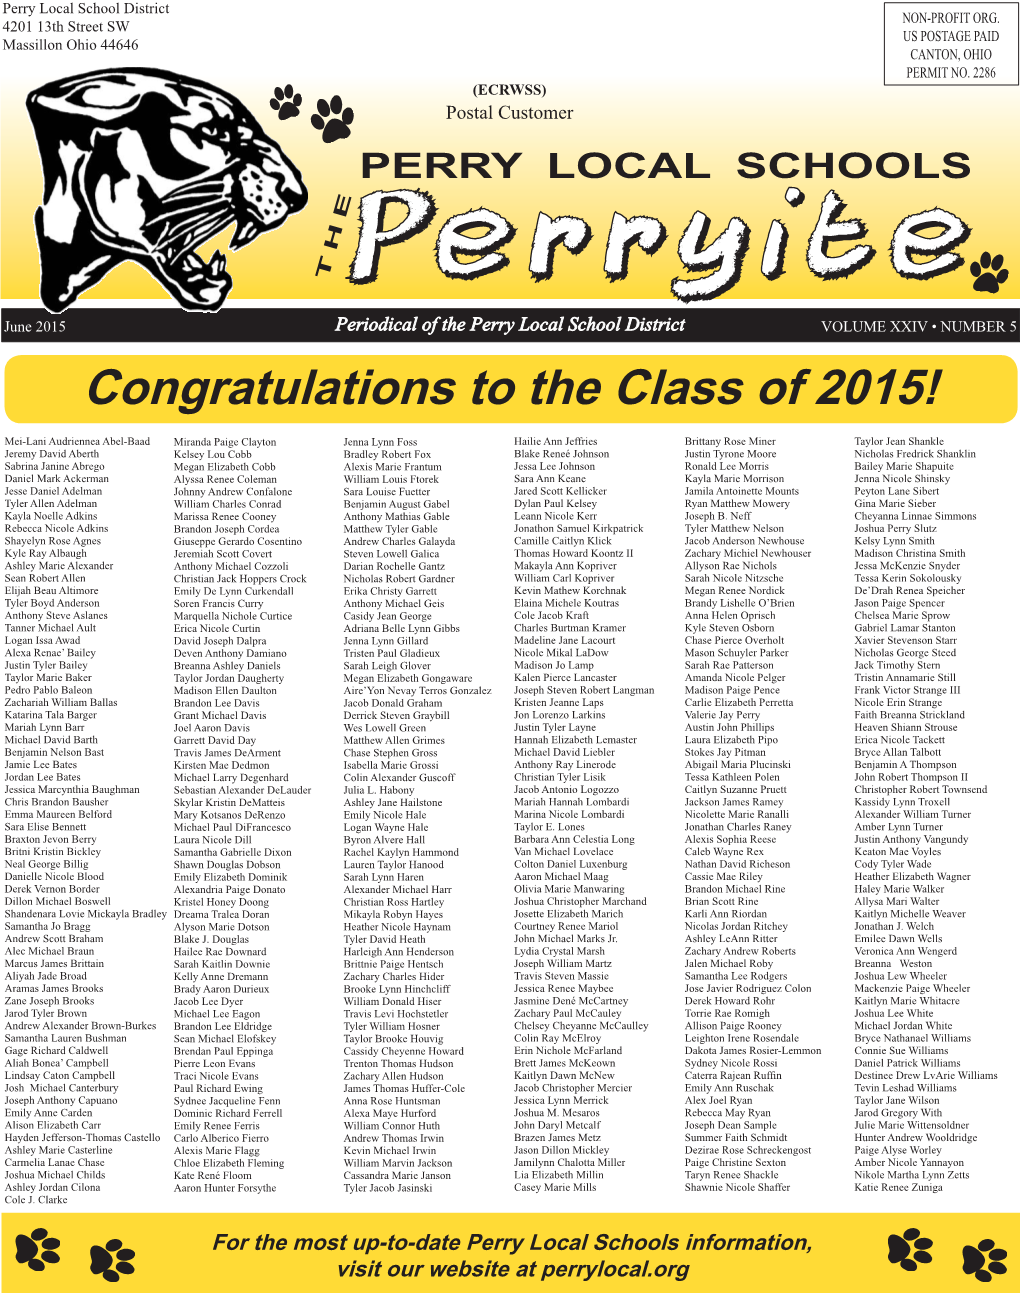 Congratulations to the Class of 2015!